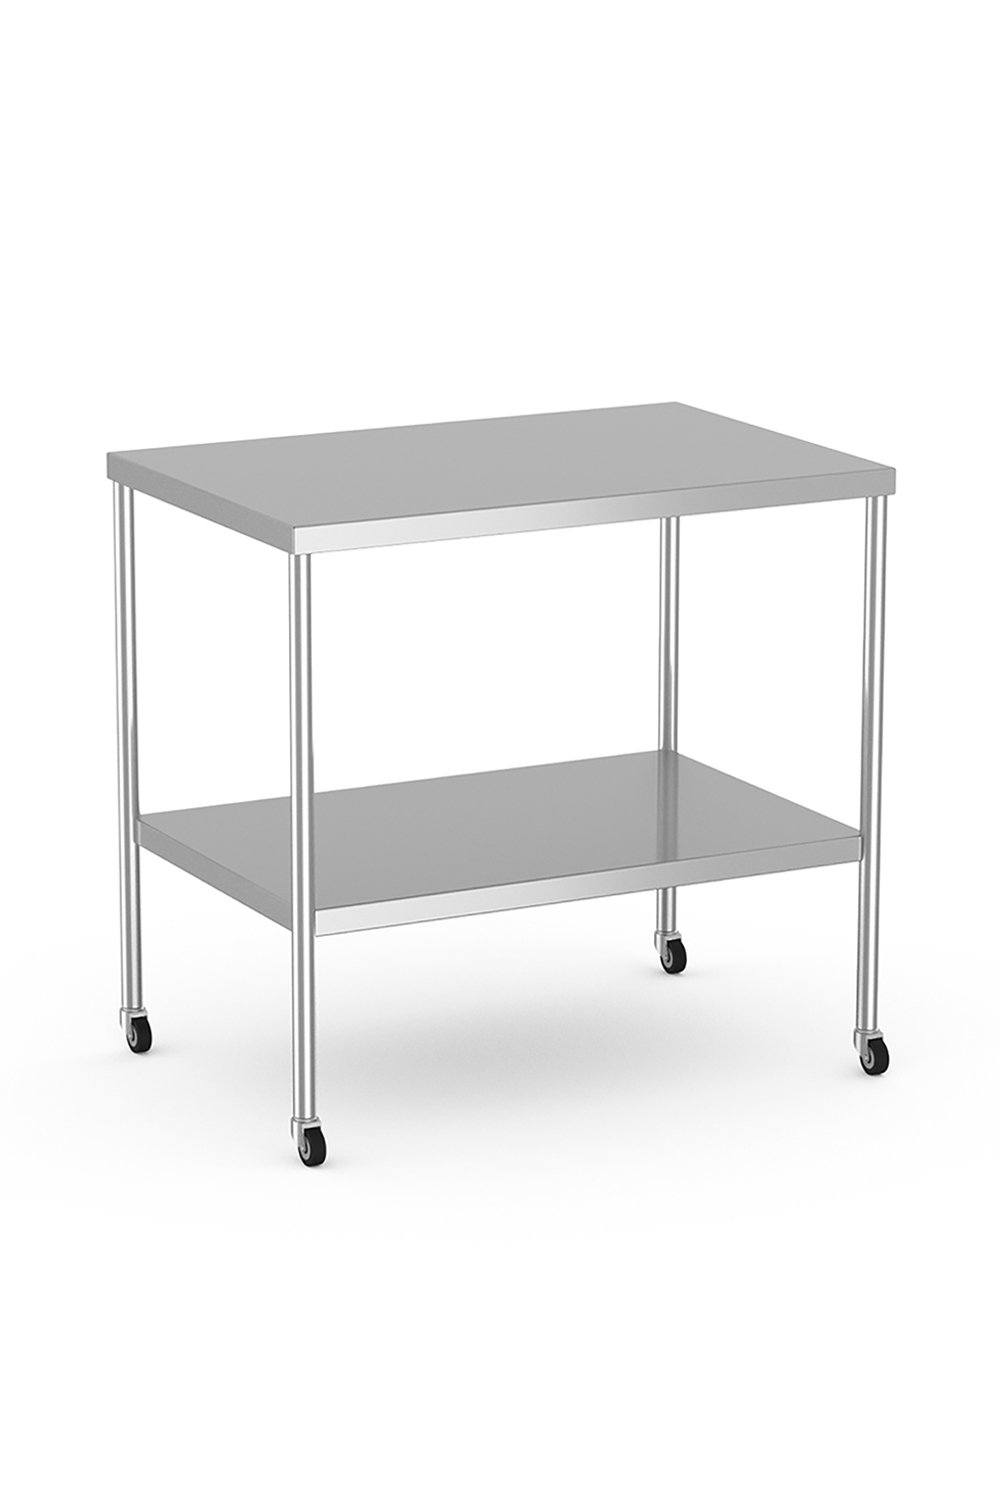 Stainless Steel Table Stainless Solutions Macmedical 24"D x 36"W x 34"H Under-shelf 